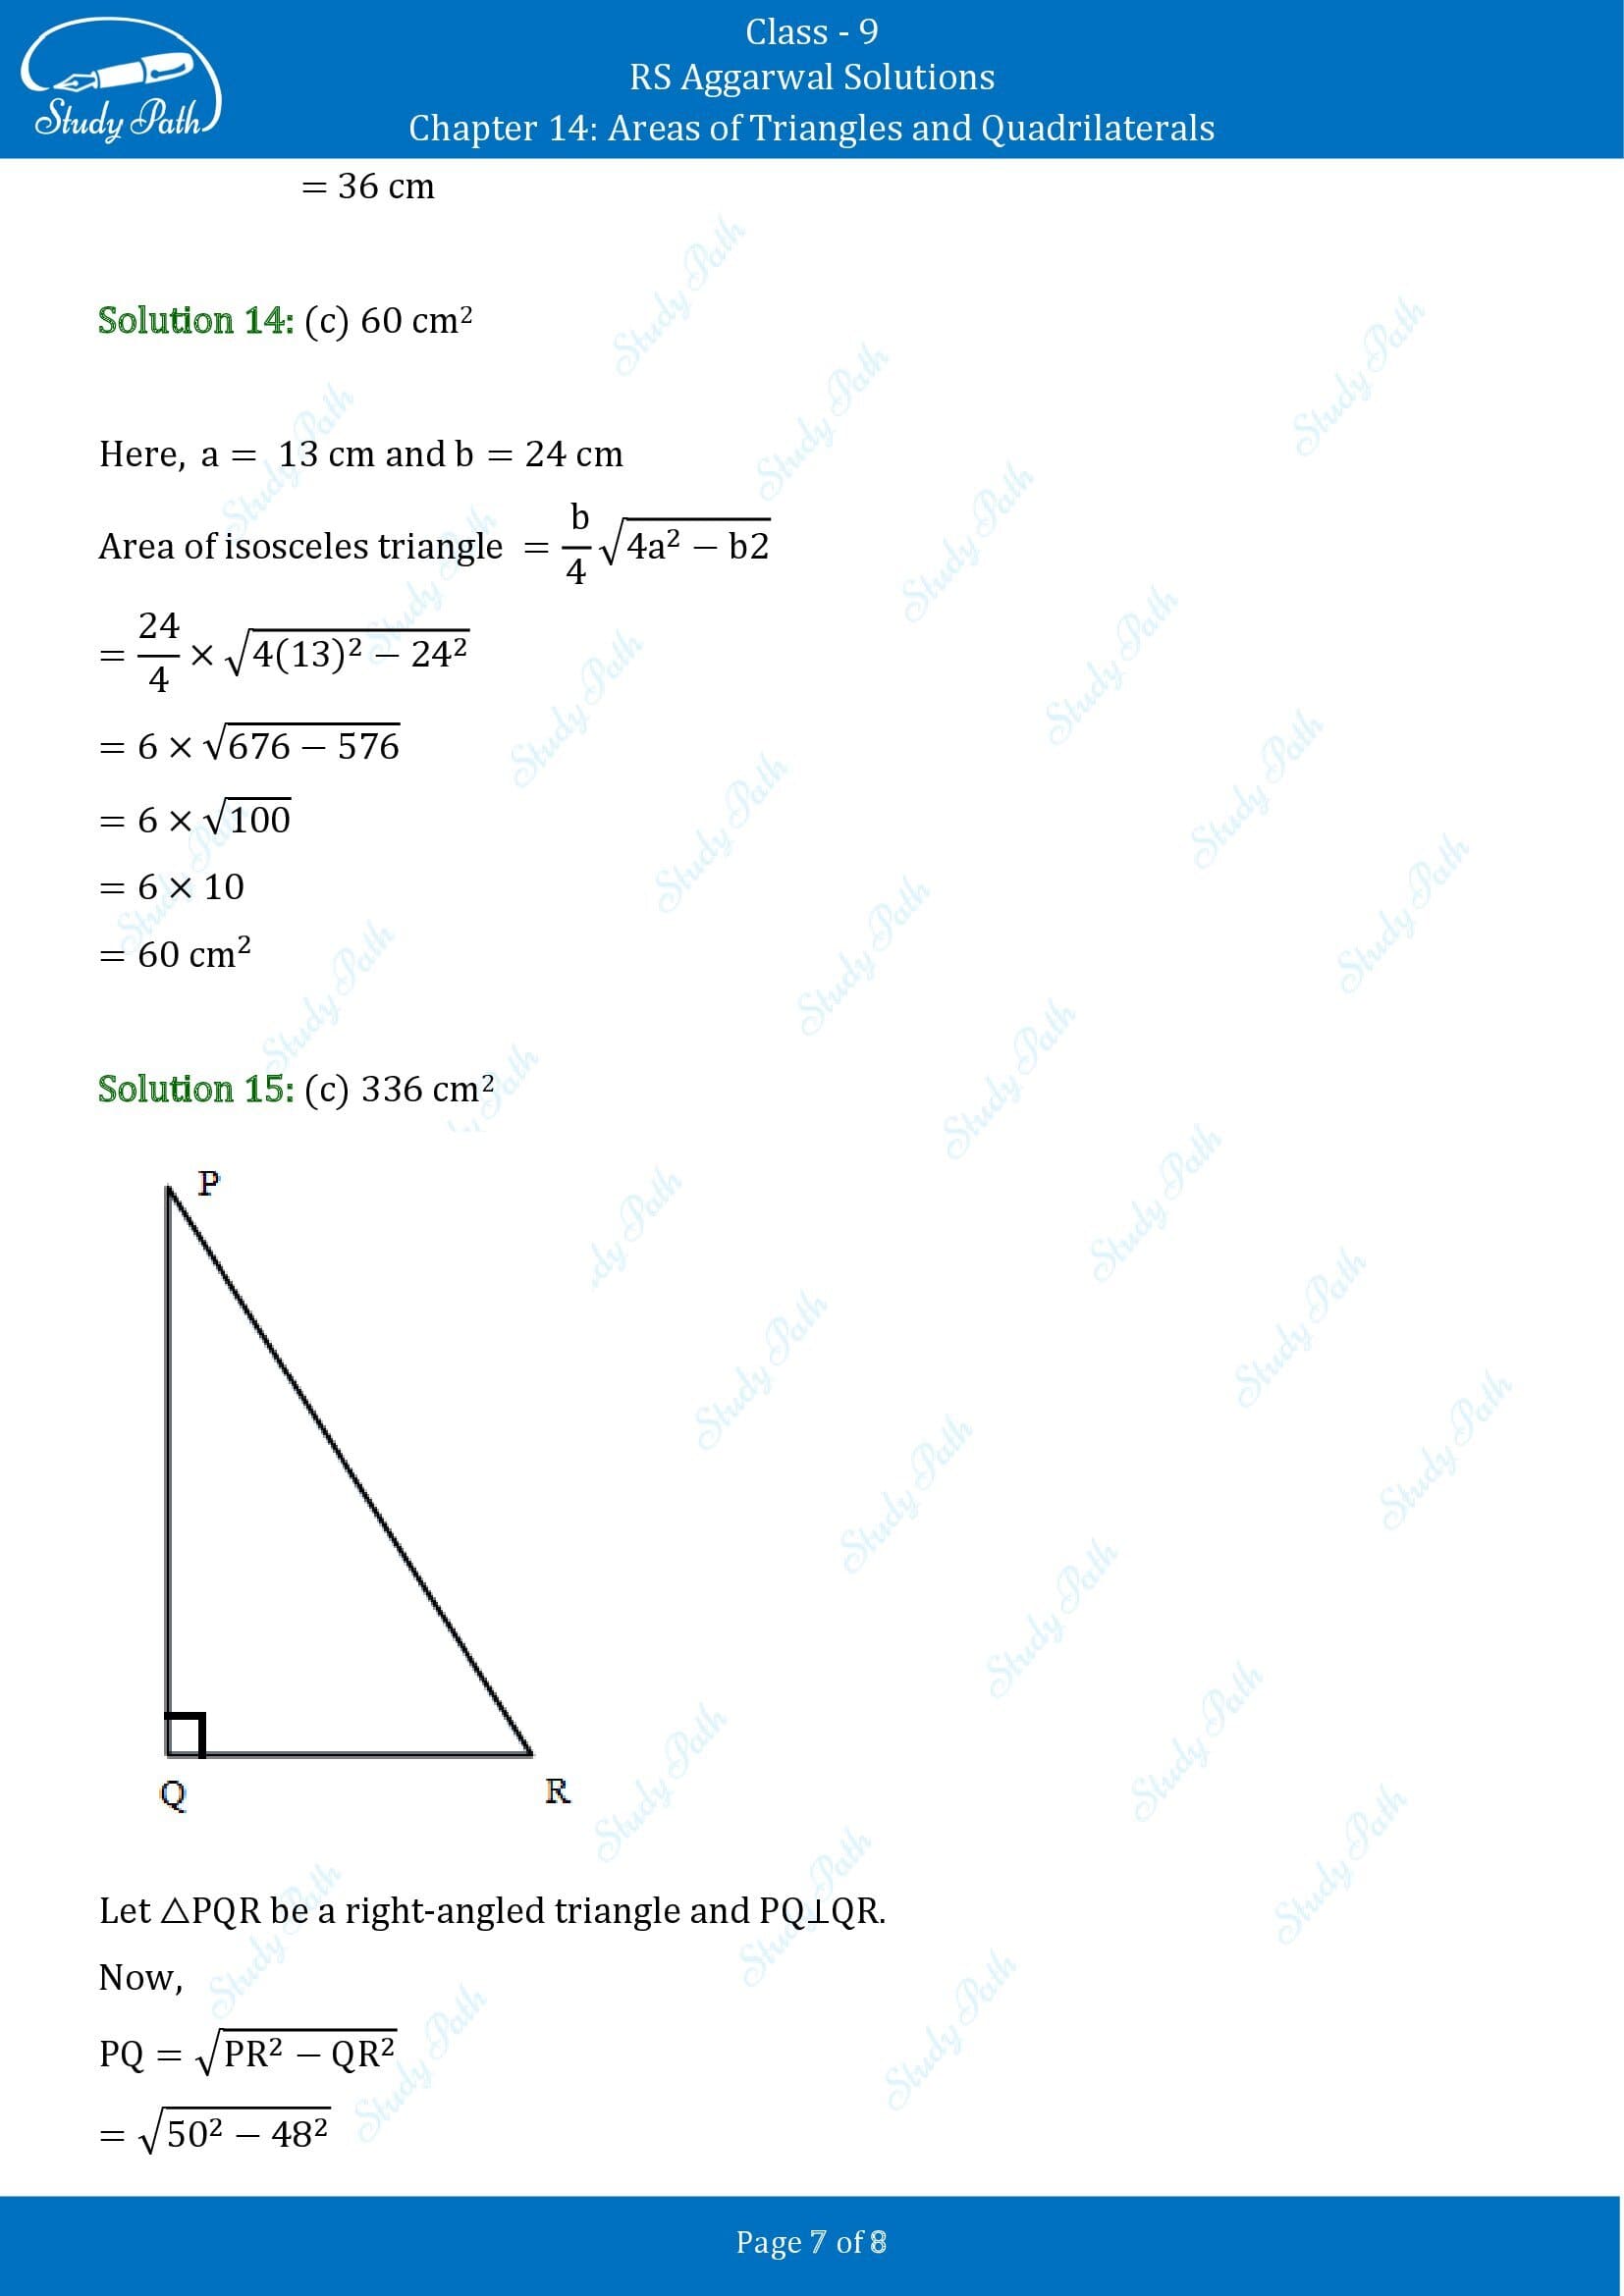 RS Aggarwal Solutions Class 9 Chapter 14 Areas of Triangles and Quadrilaterals Multiple Choice Questions MCQs 00007